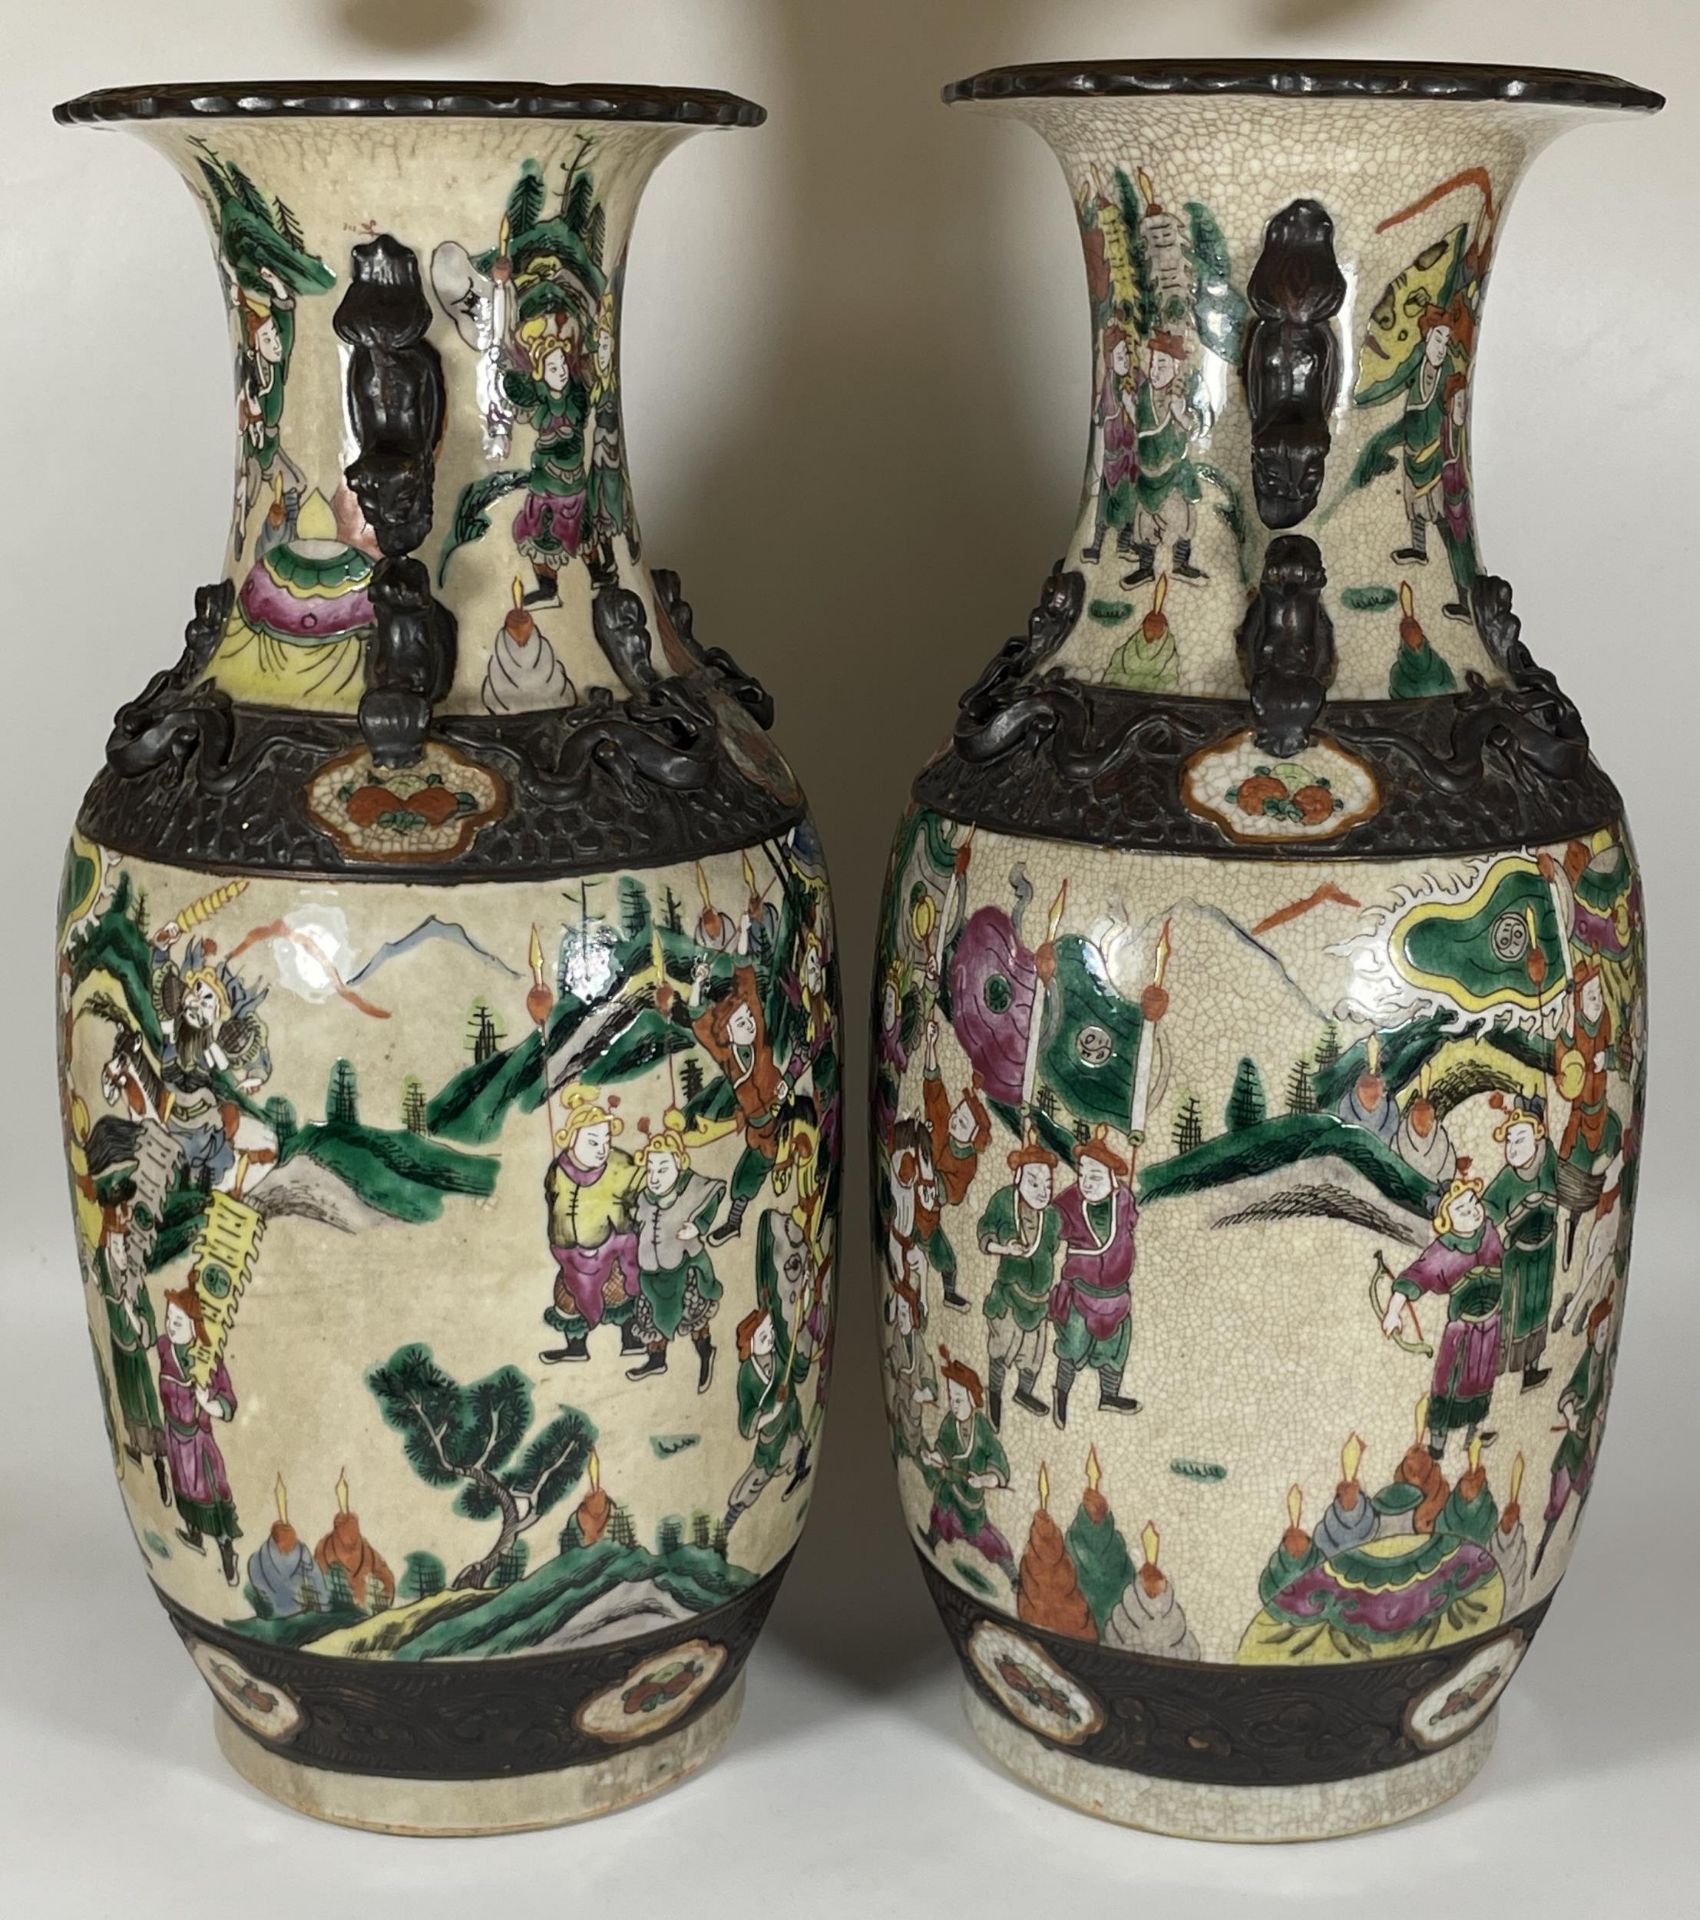 A HUGE PAIR OF CHINESE LATE 19TH / EARLY 20TH CENTURY CRACKLE GLAZE PORCELAIN VASES DEPICTING - Image 6 of 8